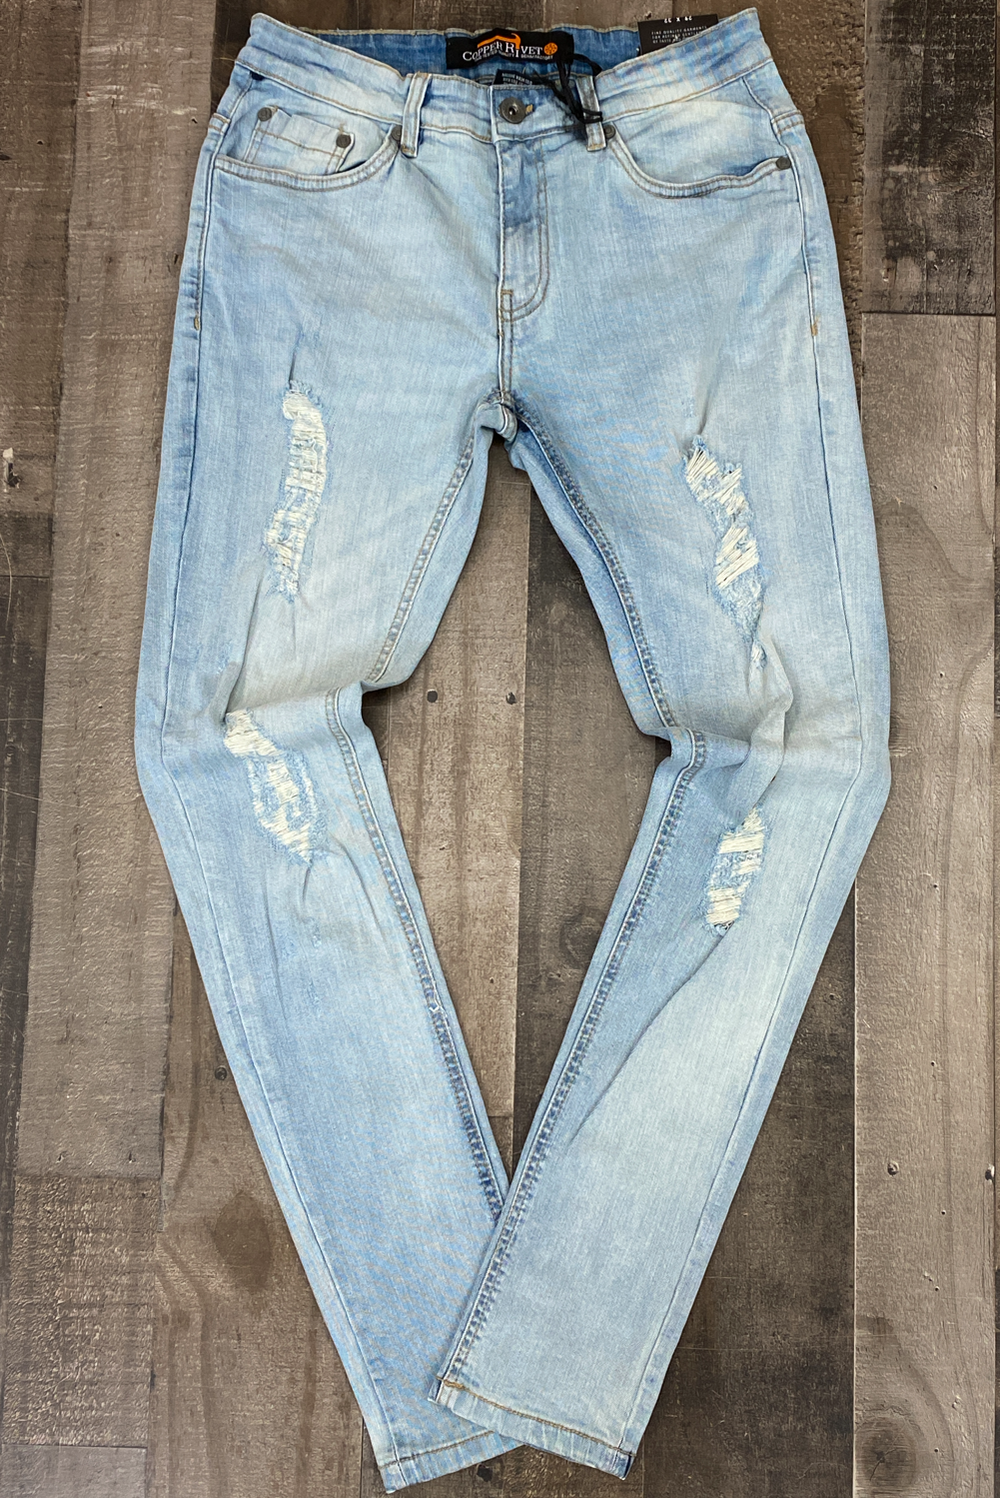 Copper Rivet- light wash jeans w/tinted rips